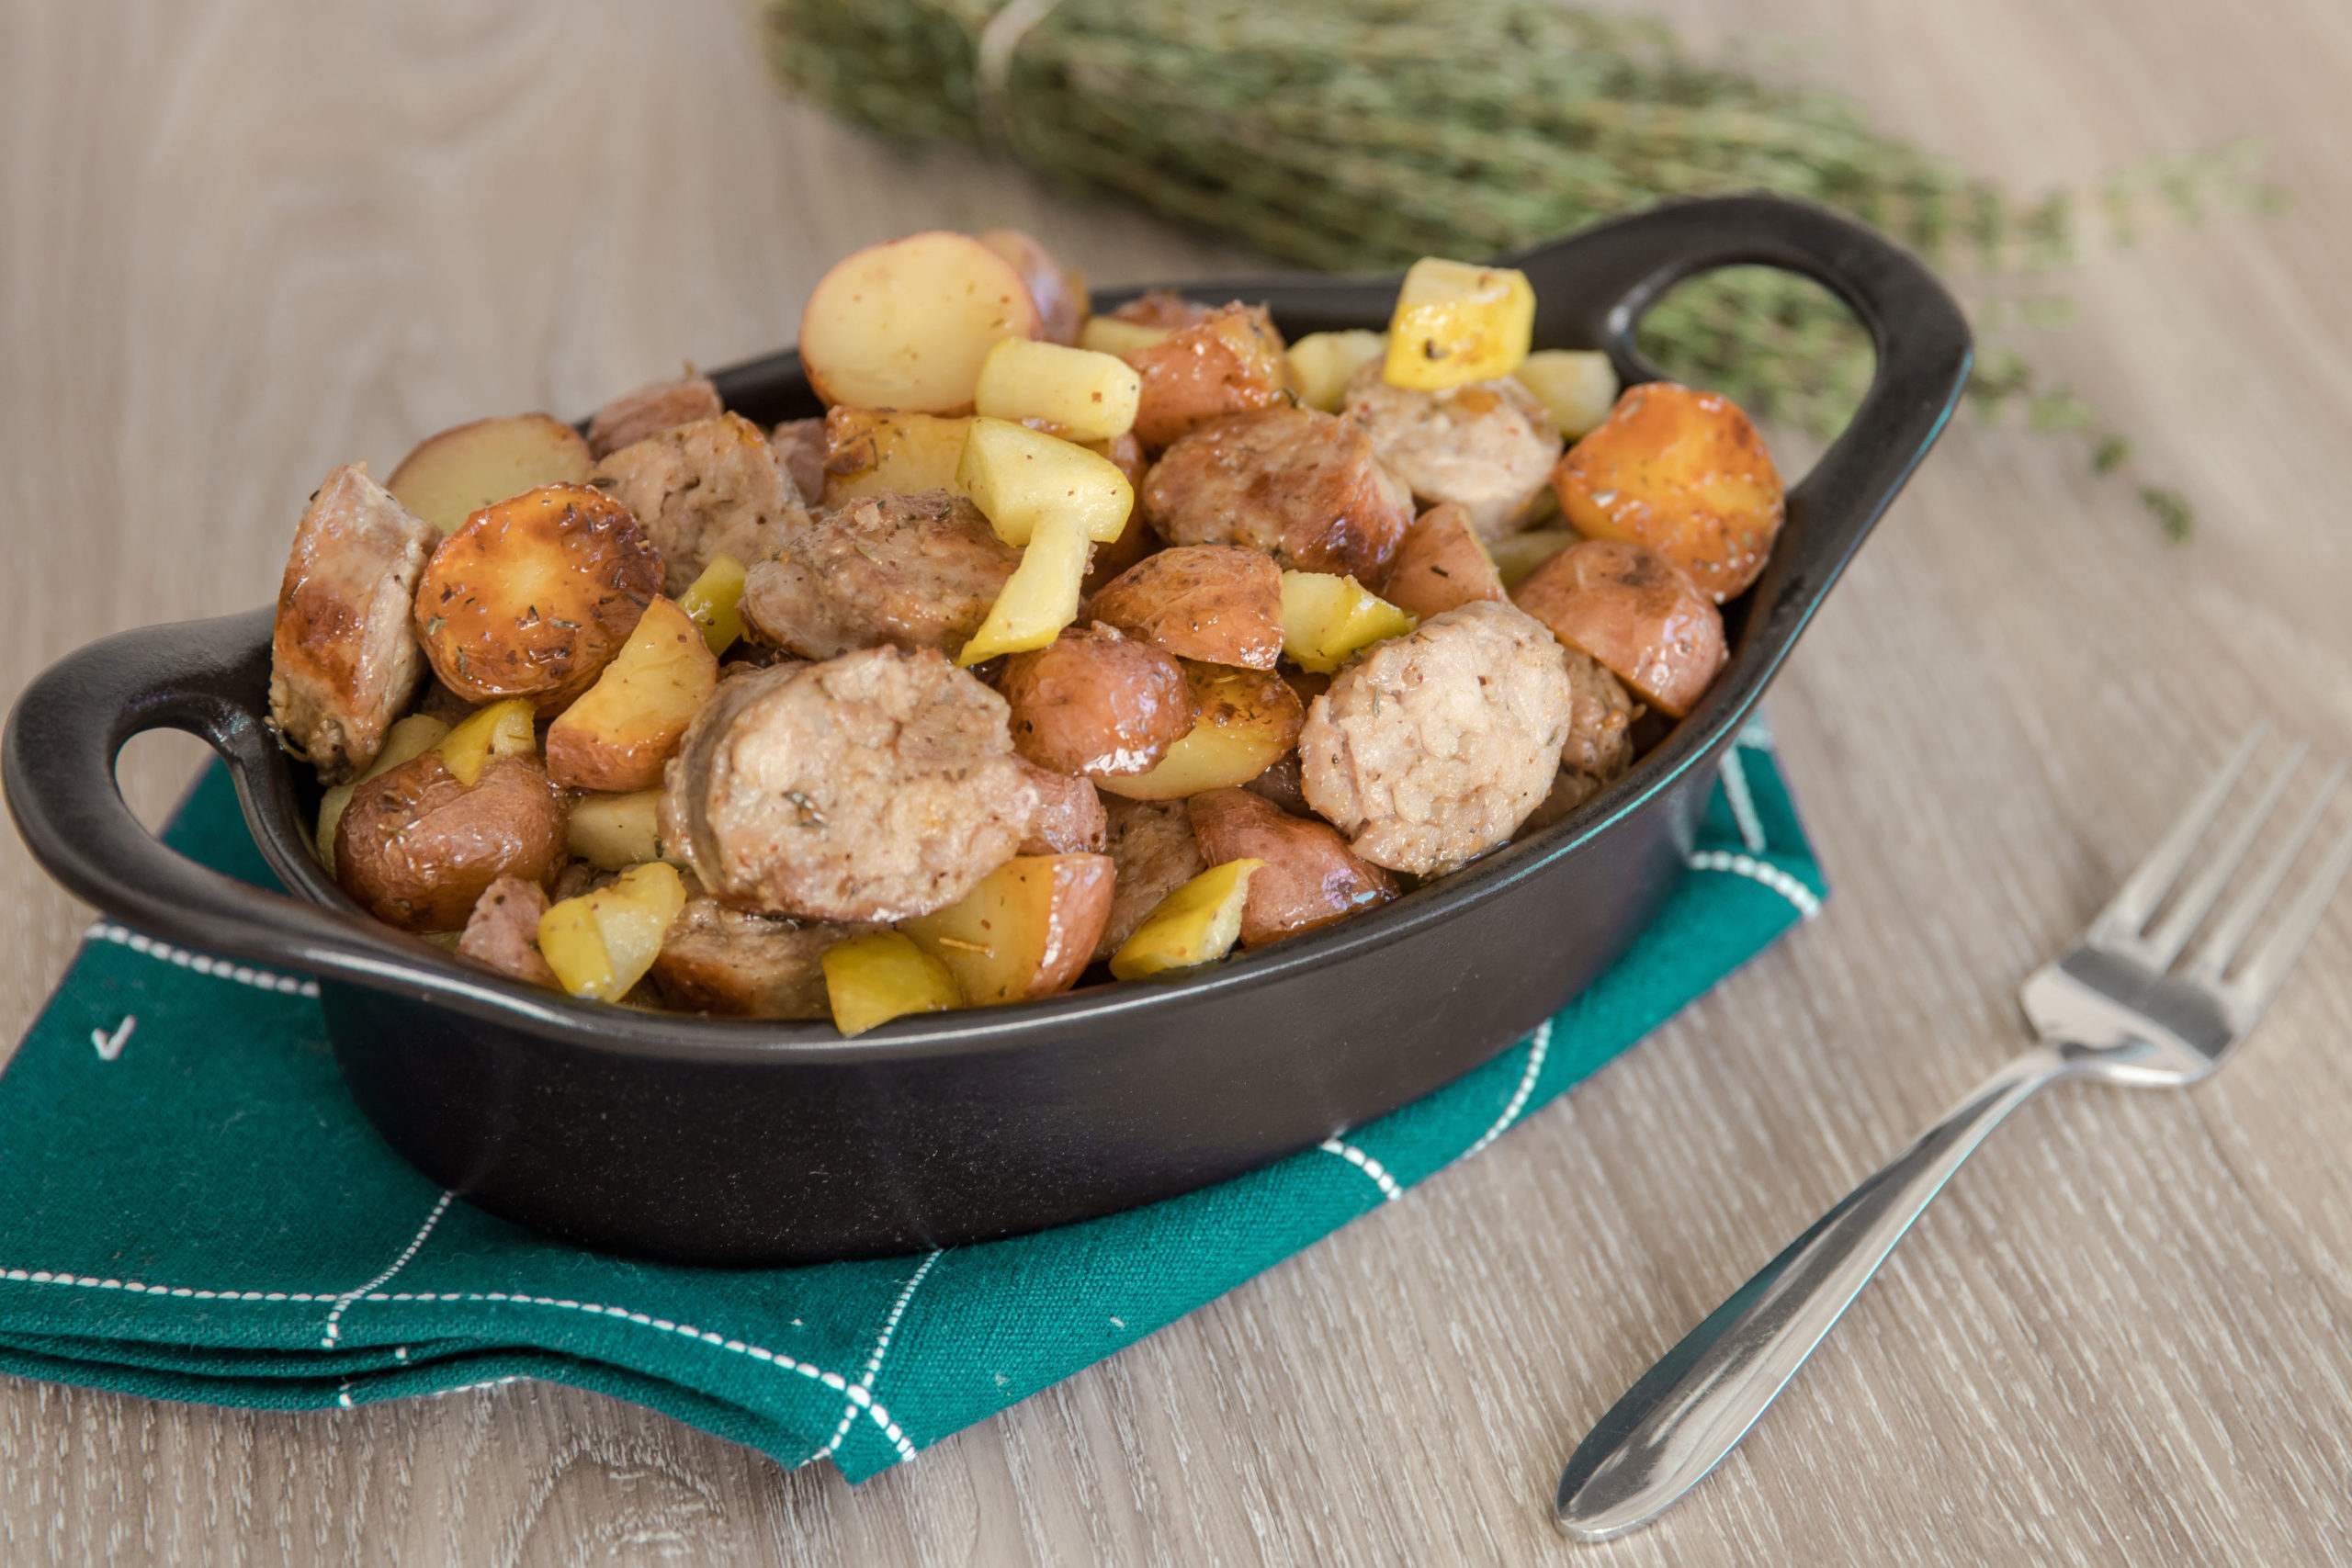 Skillet Potatoes with Apples and Sausage